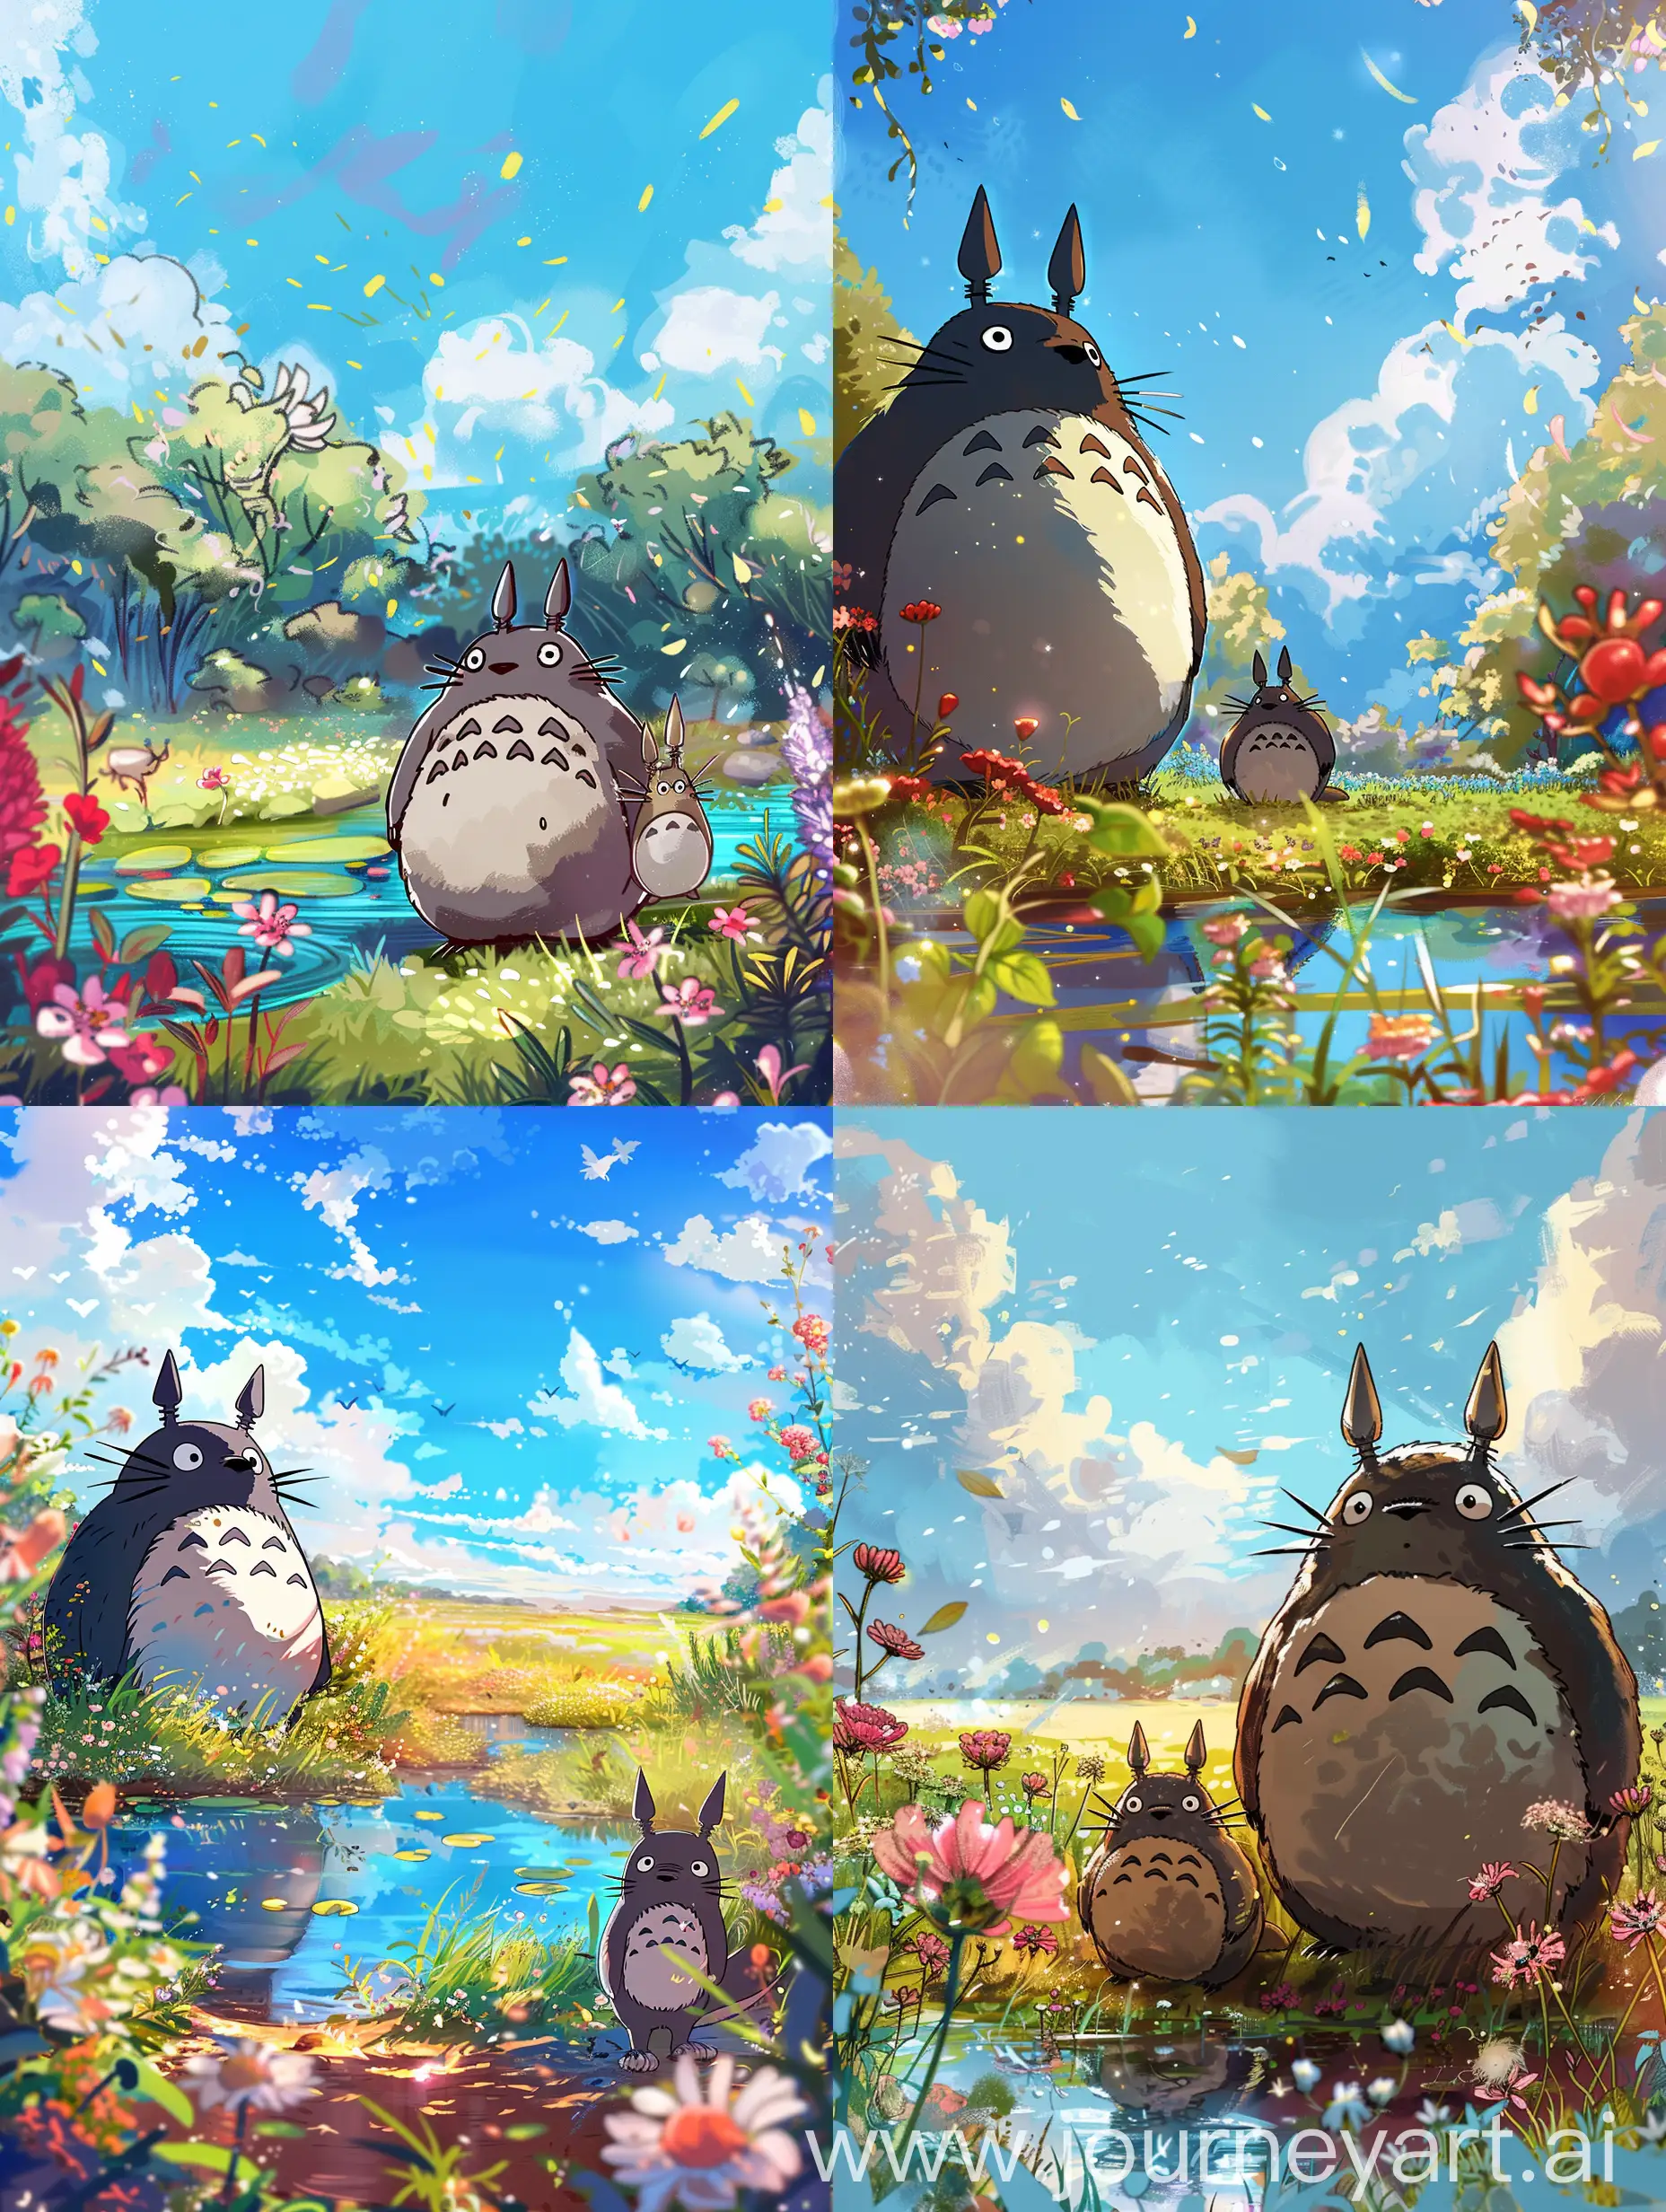 A Studio Ghibli style image featuring Totoro from ‘My Neighbor Totoro,’ standing next to Hachiwari from ‘Chiikawa.’ The scene is drawn with an anime touch, emphasizing detailed shading. The background is a vibrant, enchanted meadow with blooming flowers and a serene pond, under a bright blue sky filled with fluffy clouds. The setting is illuminated by warm, golden light, enhancing the magical and peaceful atmosphere. Totoro and Hachiwari appear deeply connected, with Totoro protectively standing beside Hachiwari. The overall composition captures the essence of a whimsical adventure in a tranquil, magical world, characteristic of Studio Ghibli’s iconic style. The image has a slightly faded and nostalgic look, reminiscent of classic Ghibli films, with soft and muted colors –s 750 –niji 6